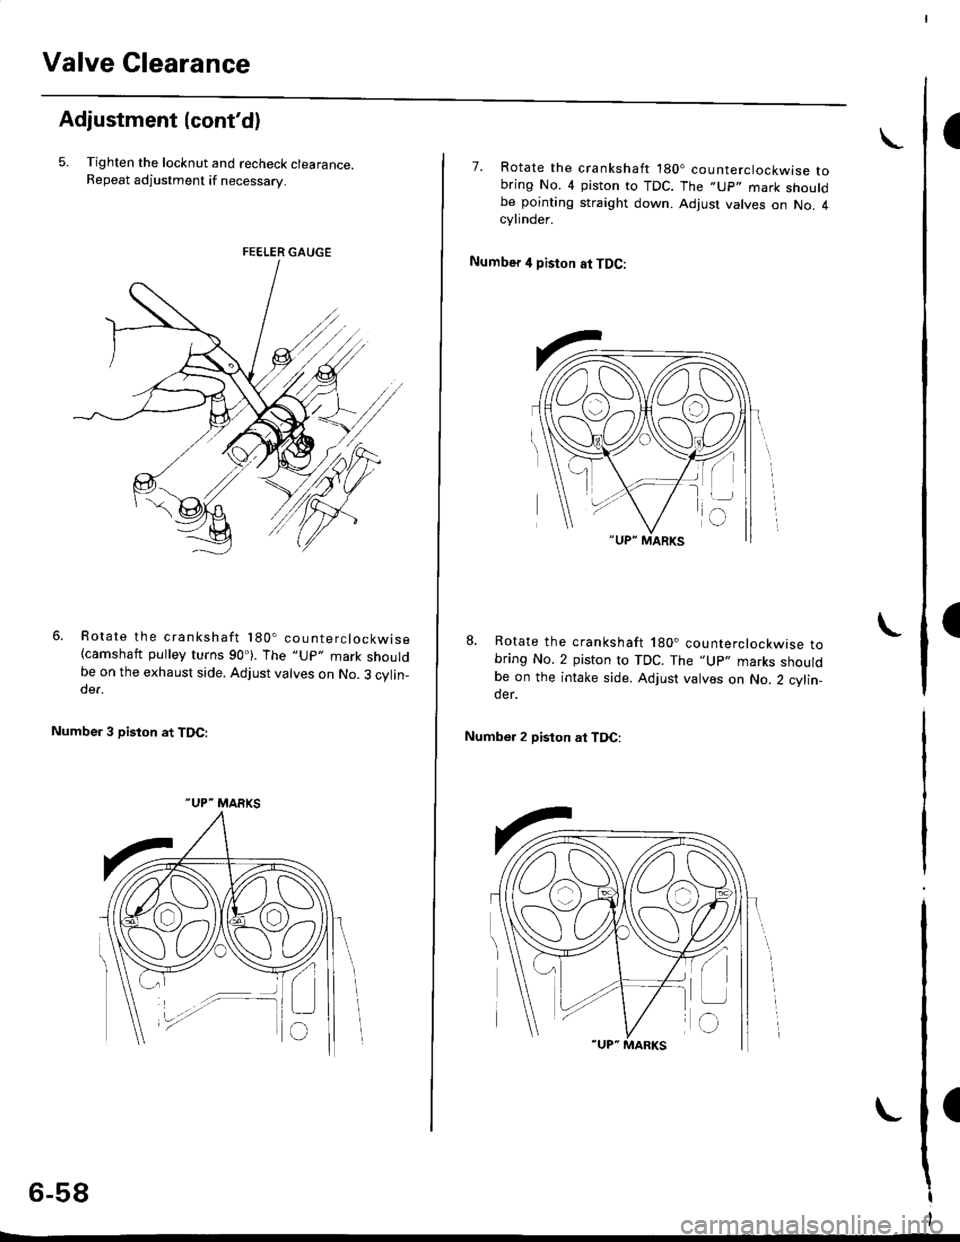 HONDA CIVIC 1997 6.G Workshop Manual Valve Clearance
I
I
I
Adjustment {contd)
5. Tighten the locknut and recheck clearance.Repeat adjustment if necessary.
Rotate the crankshaft 180. counterclockwise(camshaft pulley turns 90). The "Up" 